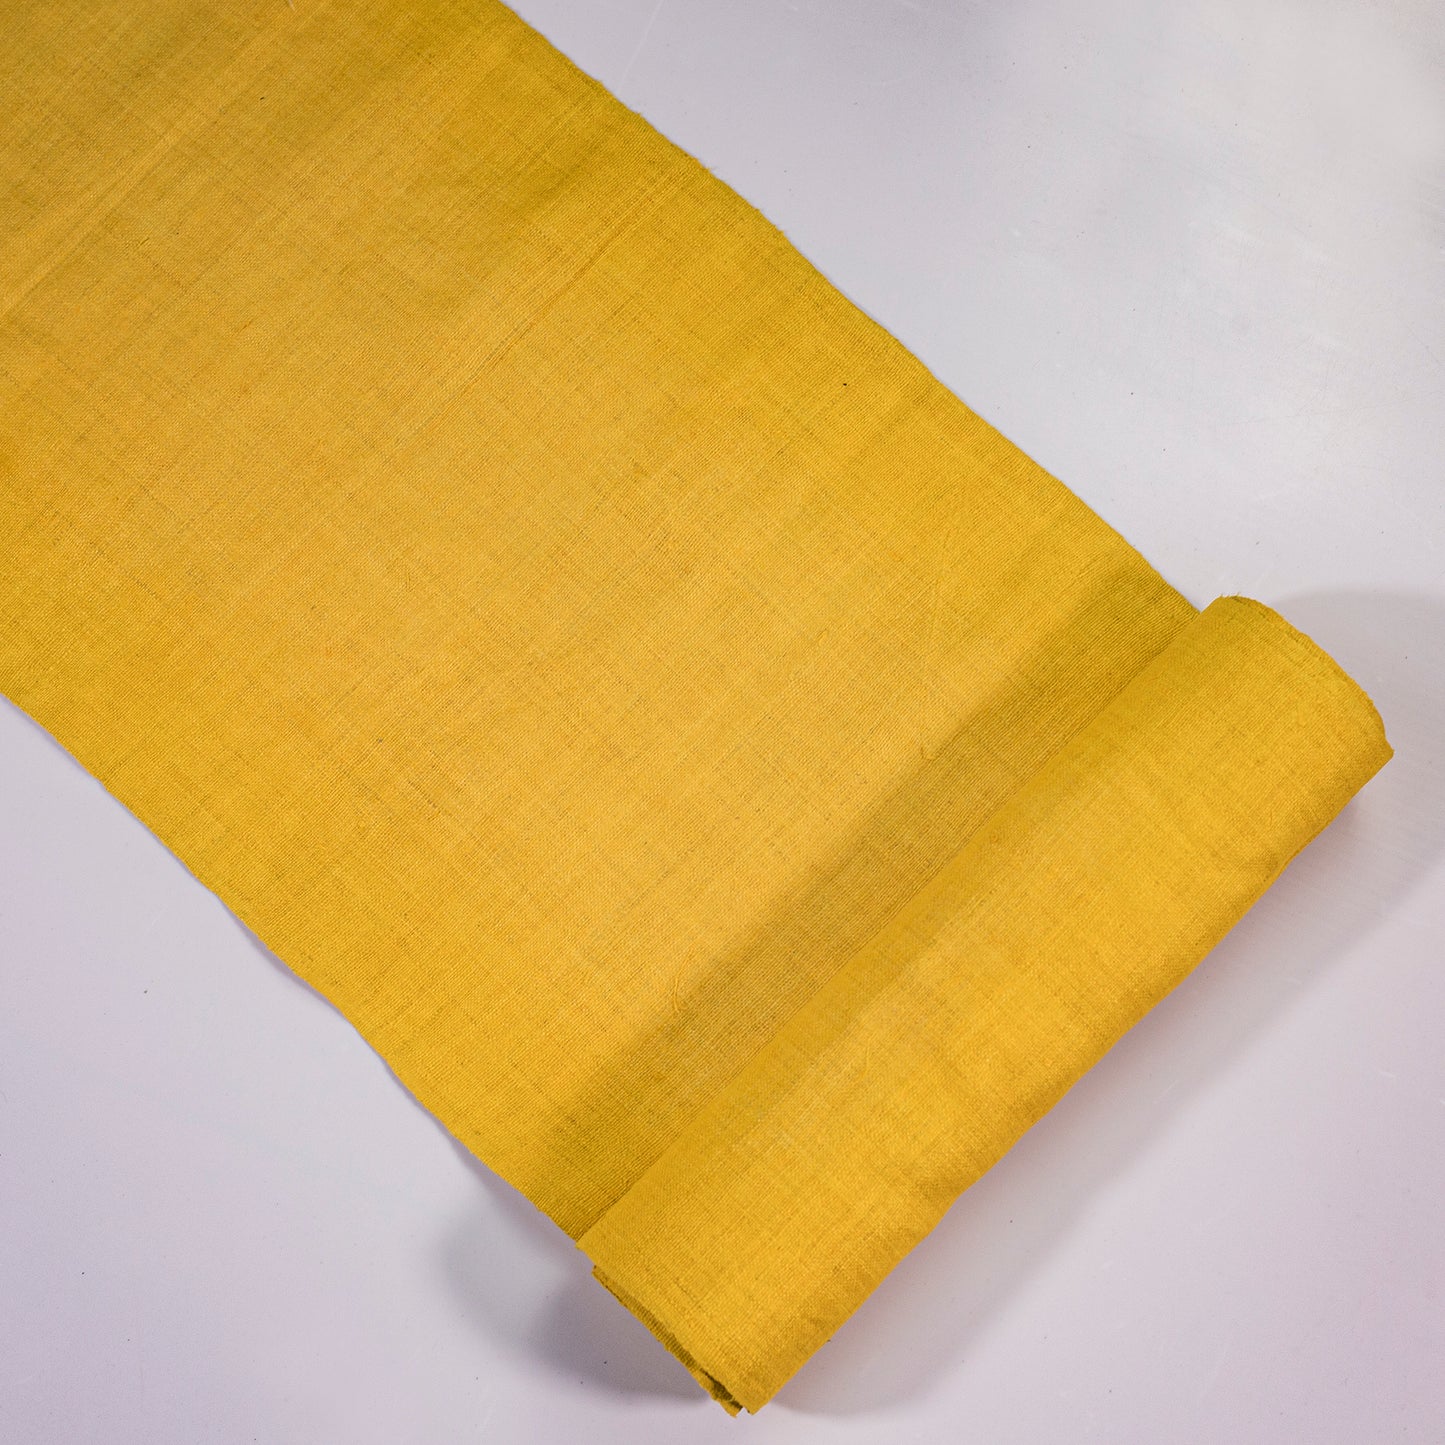 Raw hemp fabric, natural color in YELLOW